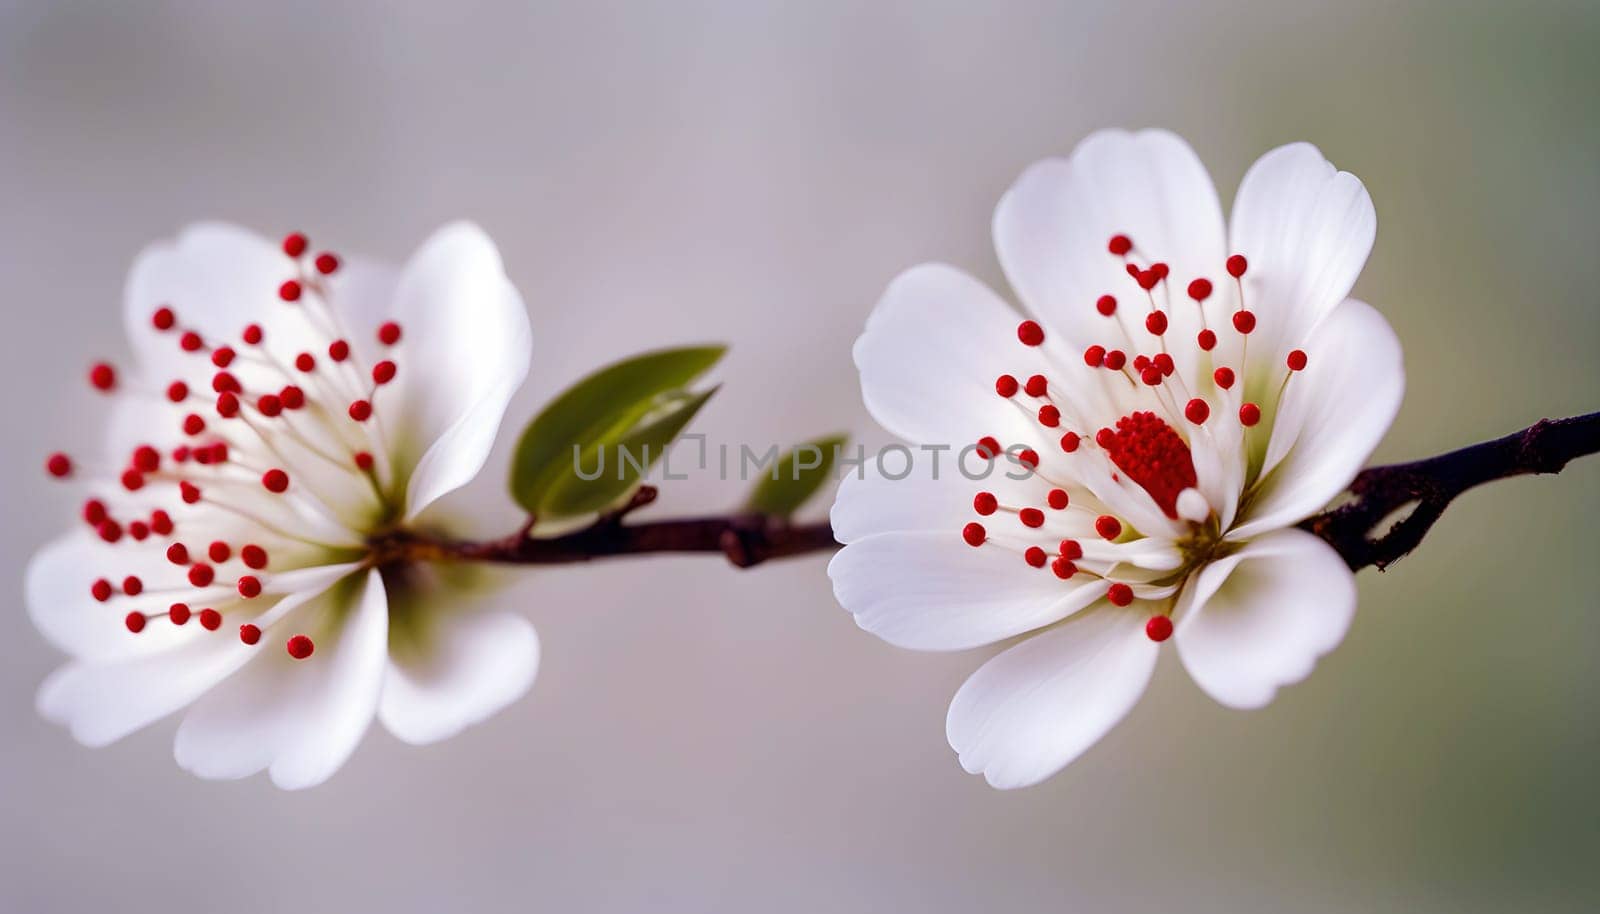 Close-up of White Cherry Blossoms with Red Stamens by rostik924